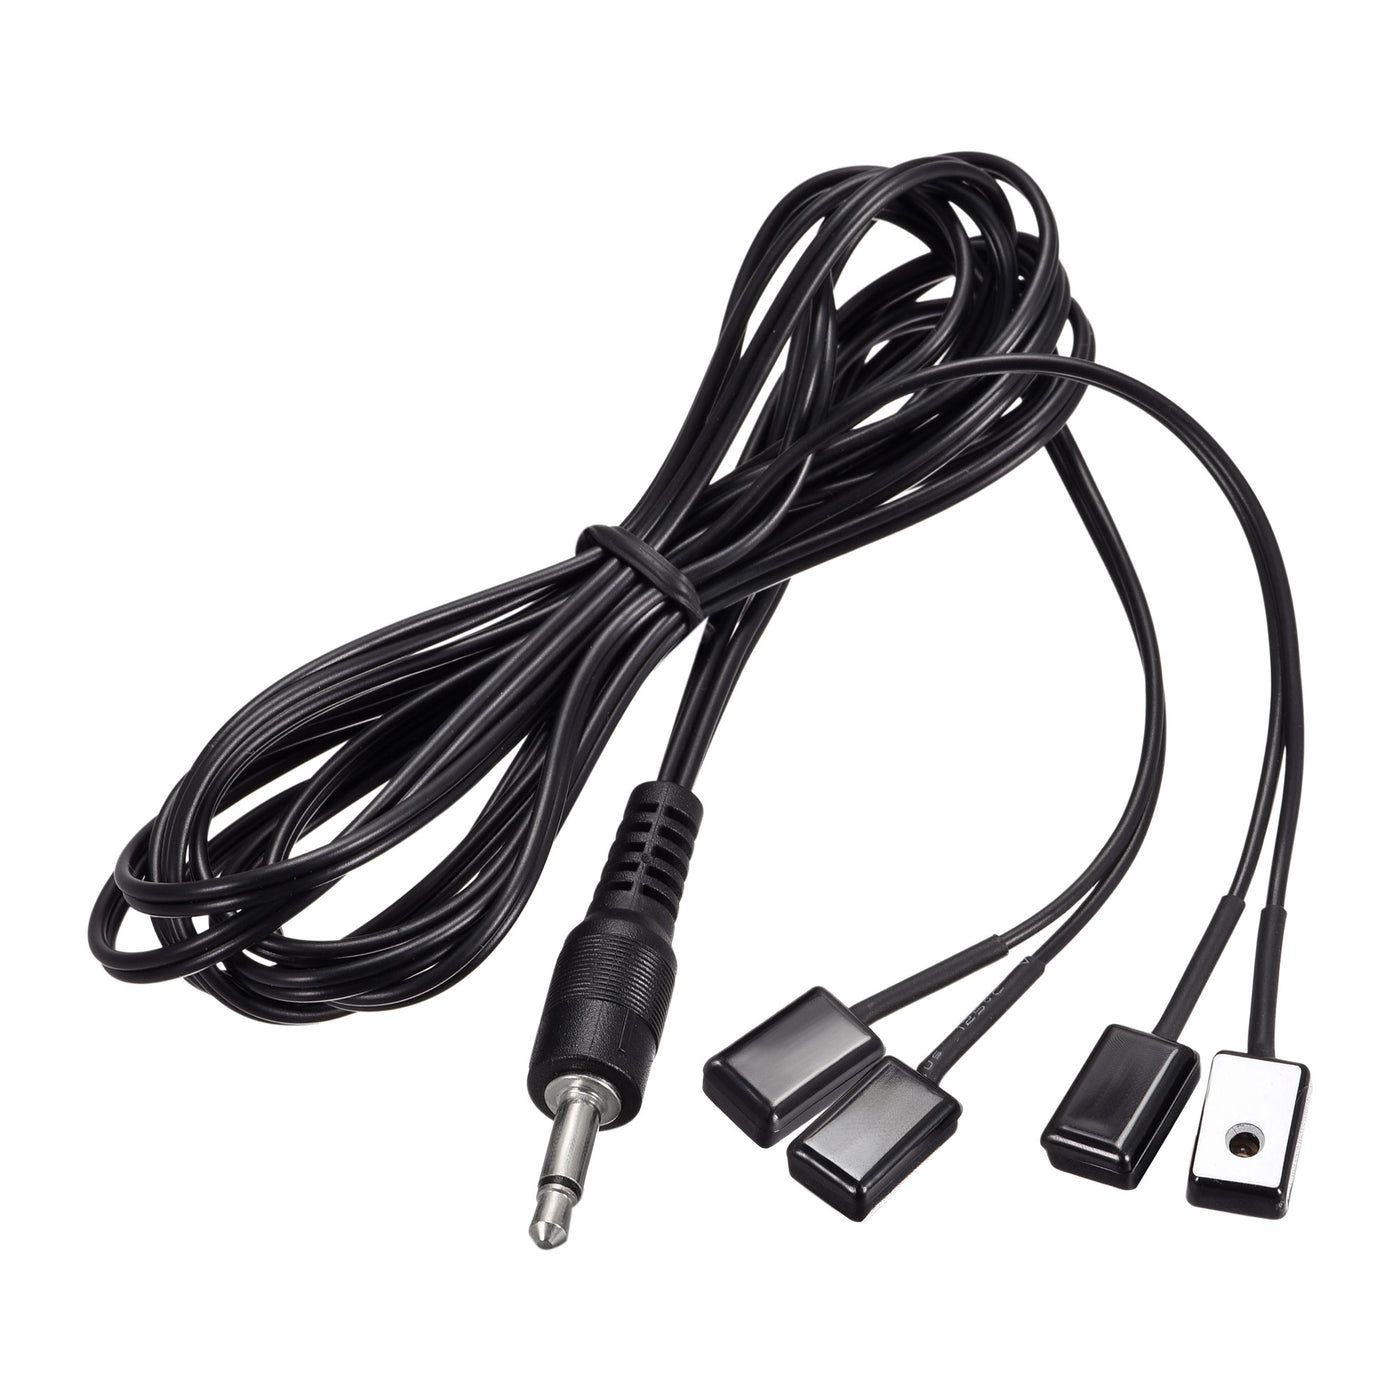 uxcell Uxcell IR Infrared Emitter Extension Cable 3.3ft Long 45 Degree Emission Angle 3.5mm Jack 4 Black Head